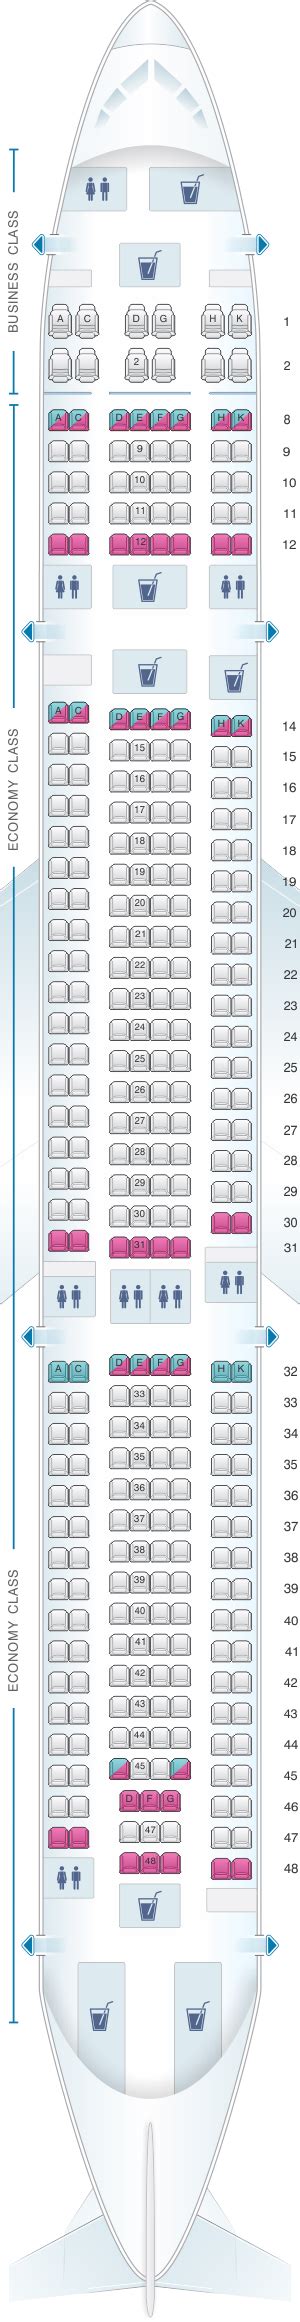 Seat Map Hi Fly Airbus A330 300 325pax Hawaiian Airlines Malaysia